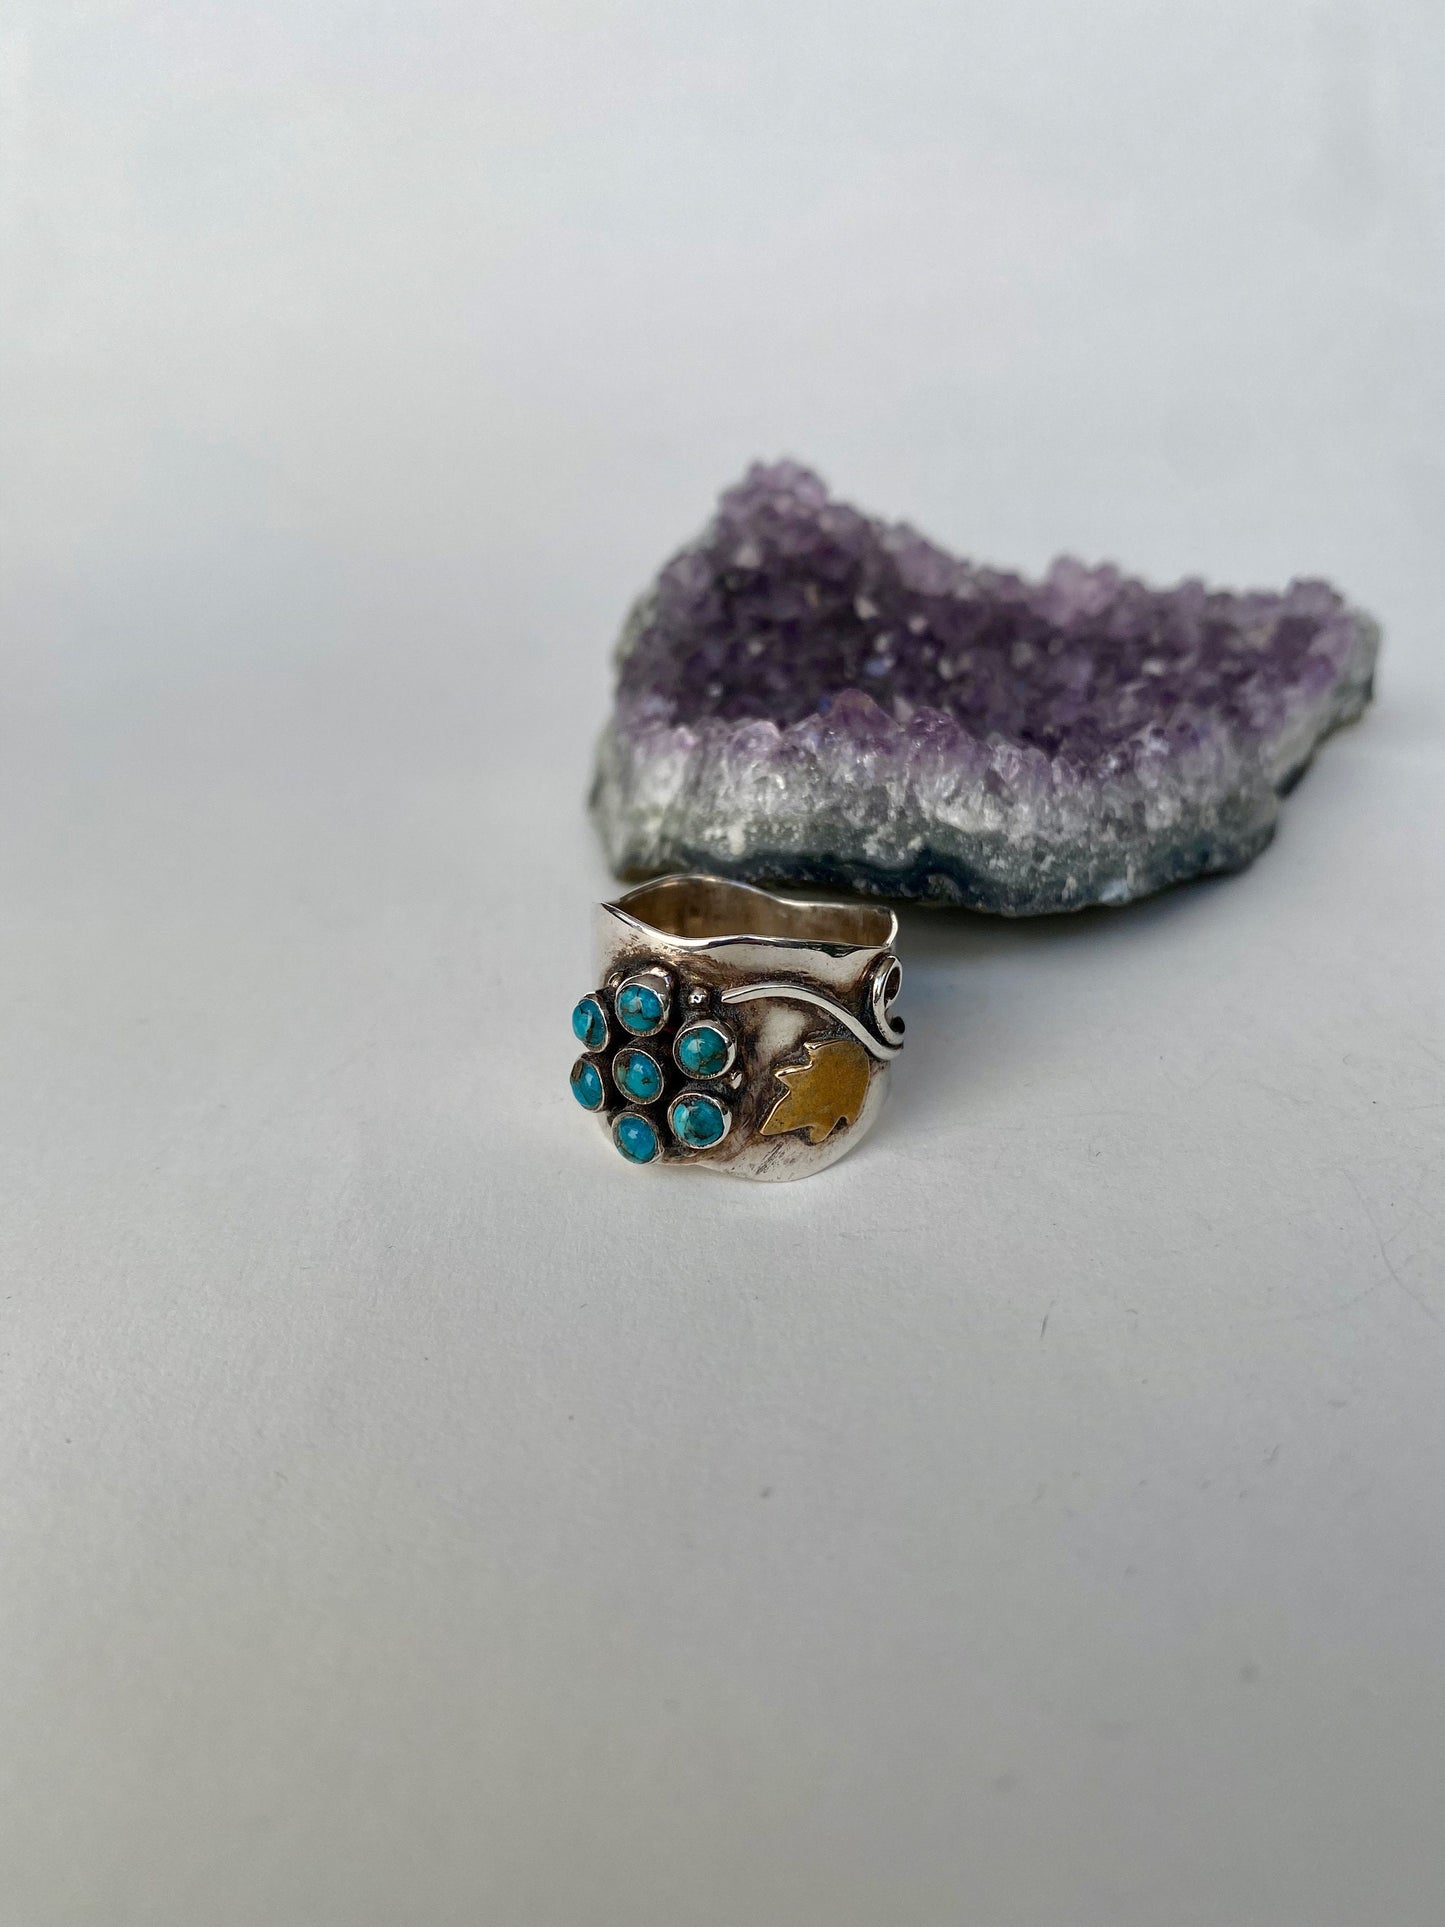 Handmade size 6 1/4 multi turquoise stone,  sterling silver band with gold accents.